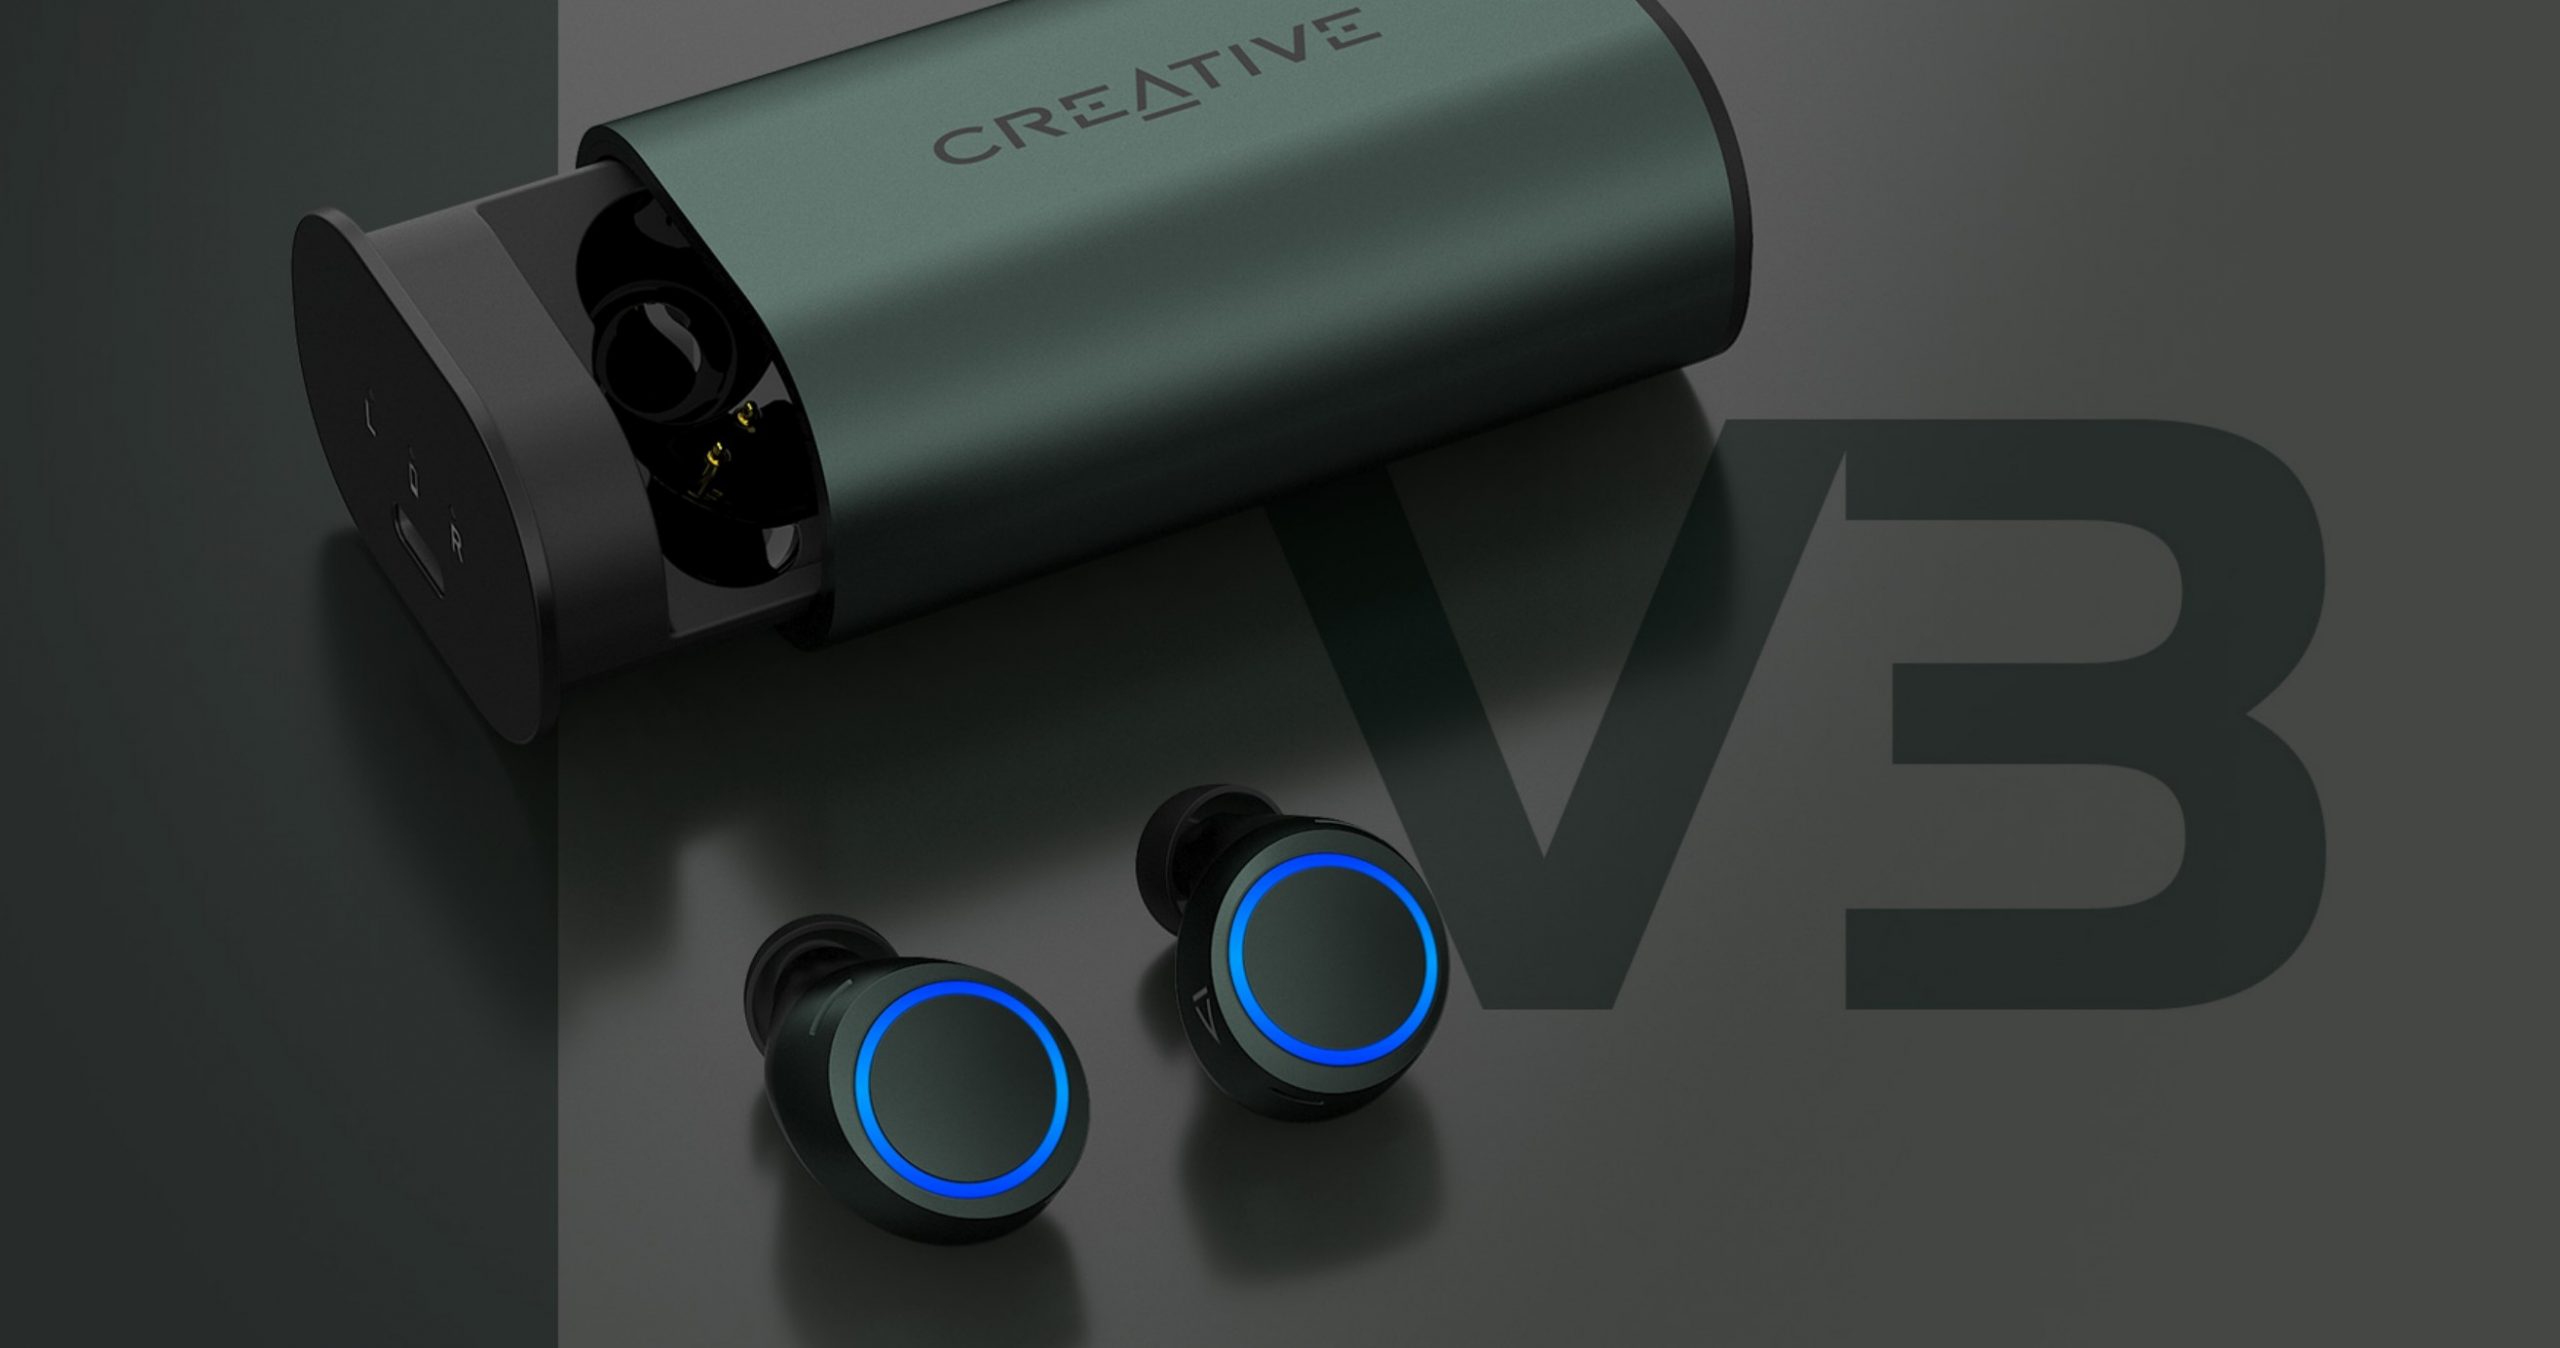 Creative Outlier Air V3 earphones – fantastic low price for high performa...